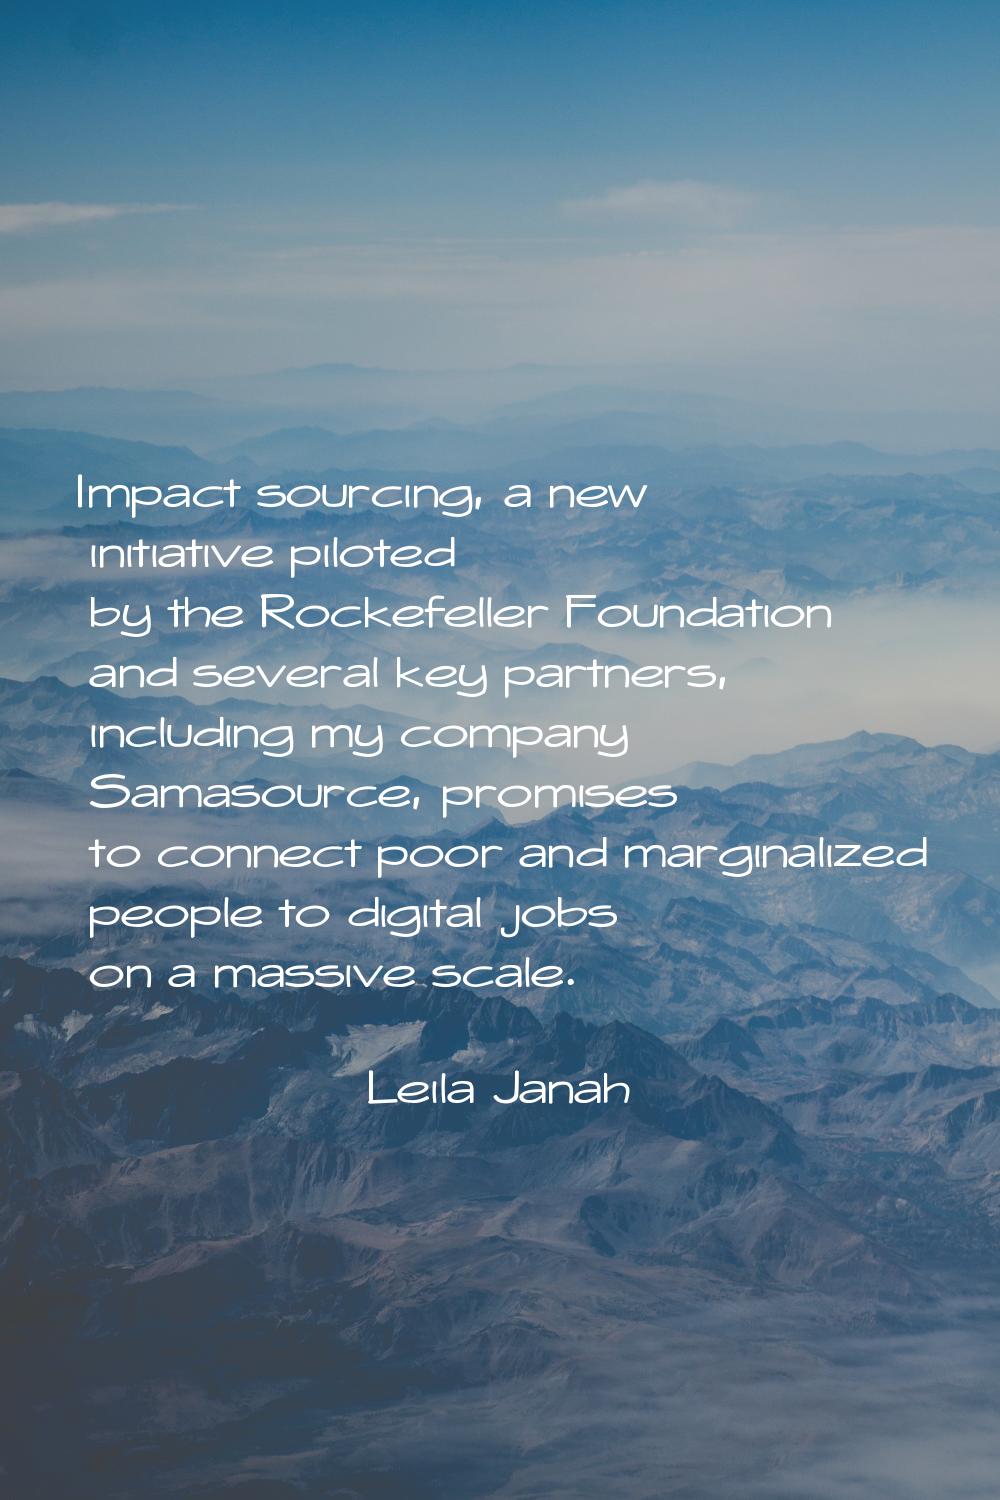 Impact sourcing, a new initiative piloted by the Rockefeller Foundation and several key partners, i